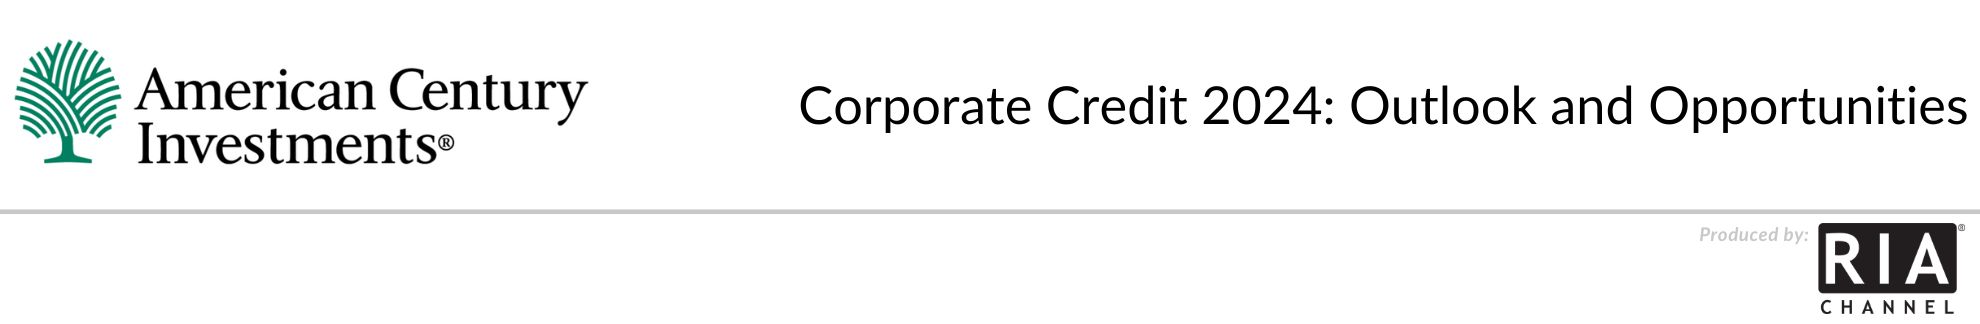 Corporate Credit 2024: Outlook and Opportunities